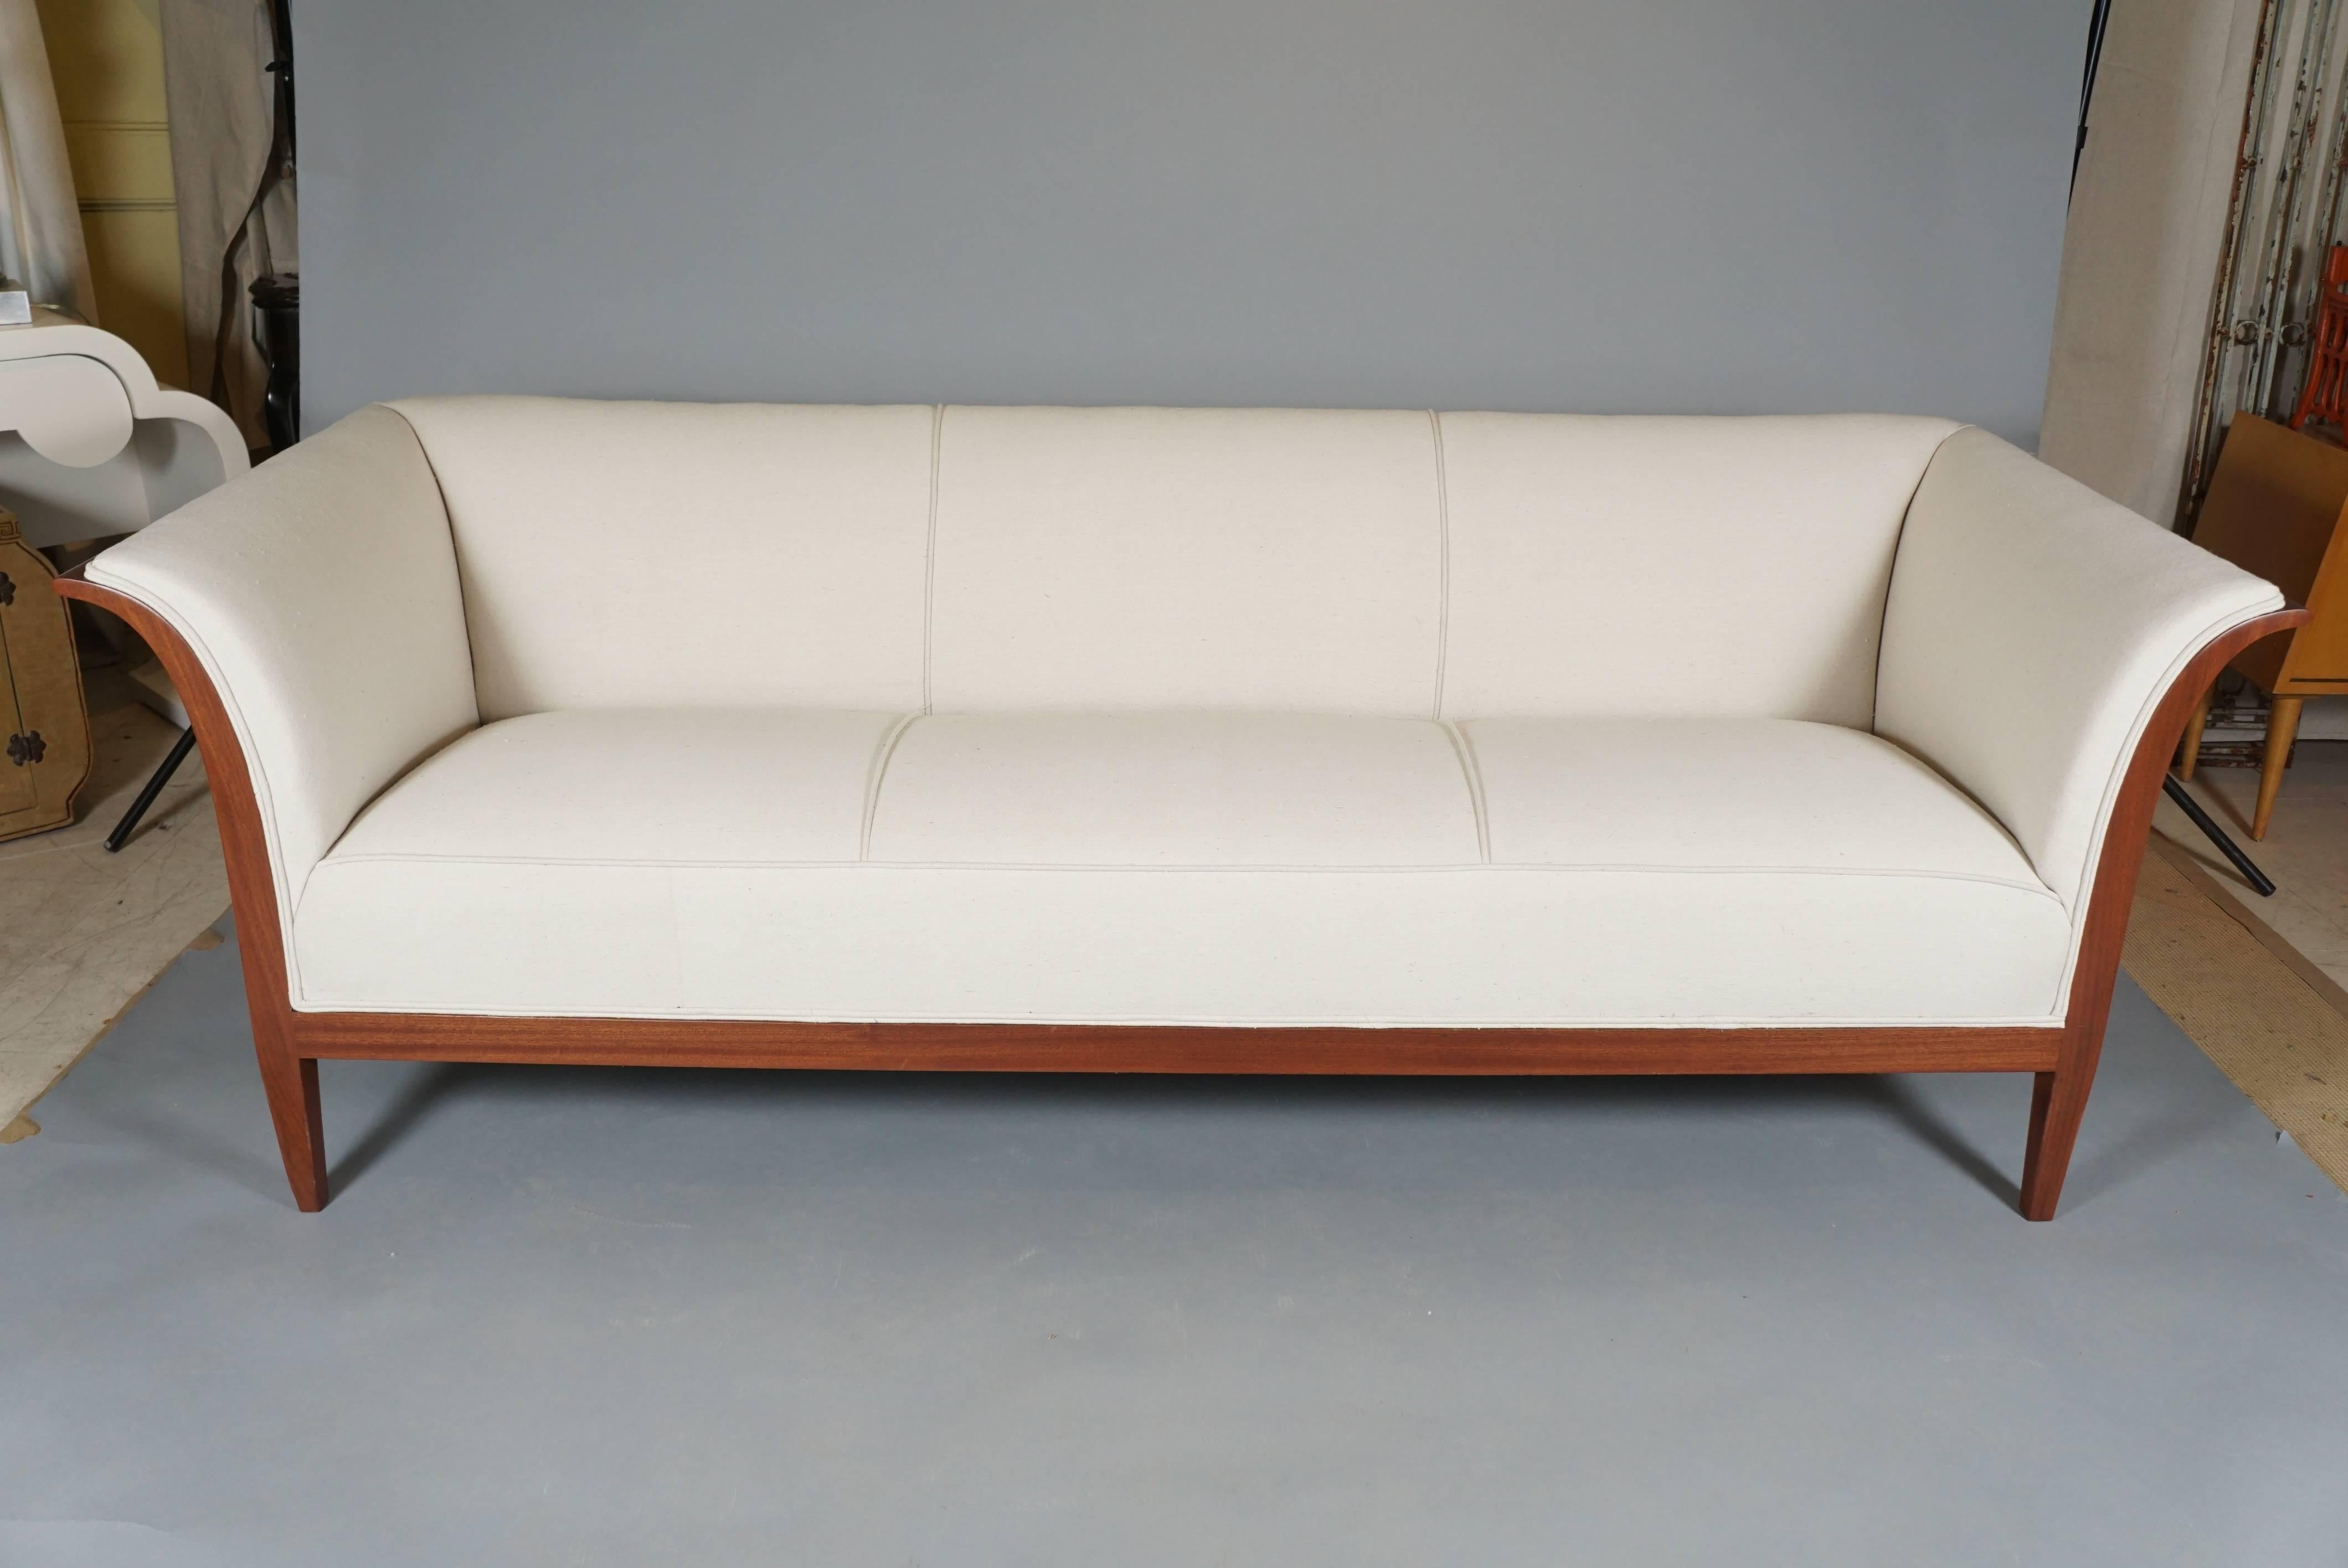 Elegant sofa by Danish designer Frits Henningsen in the neoclassical style
in mahogany, newly upholstered in cotton/linen. A pair is available.